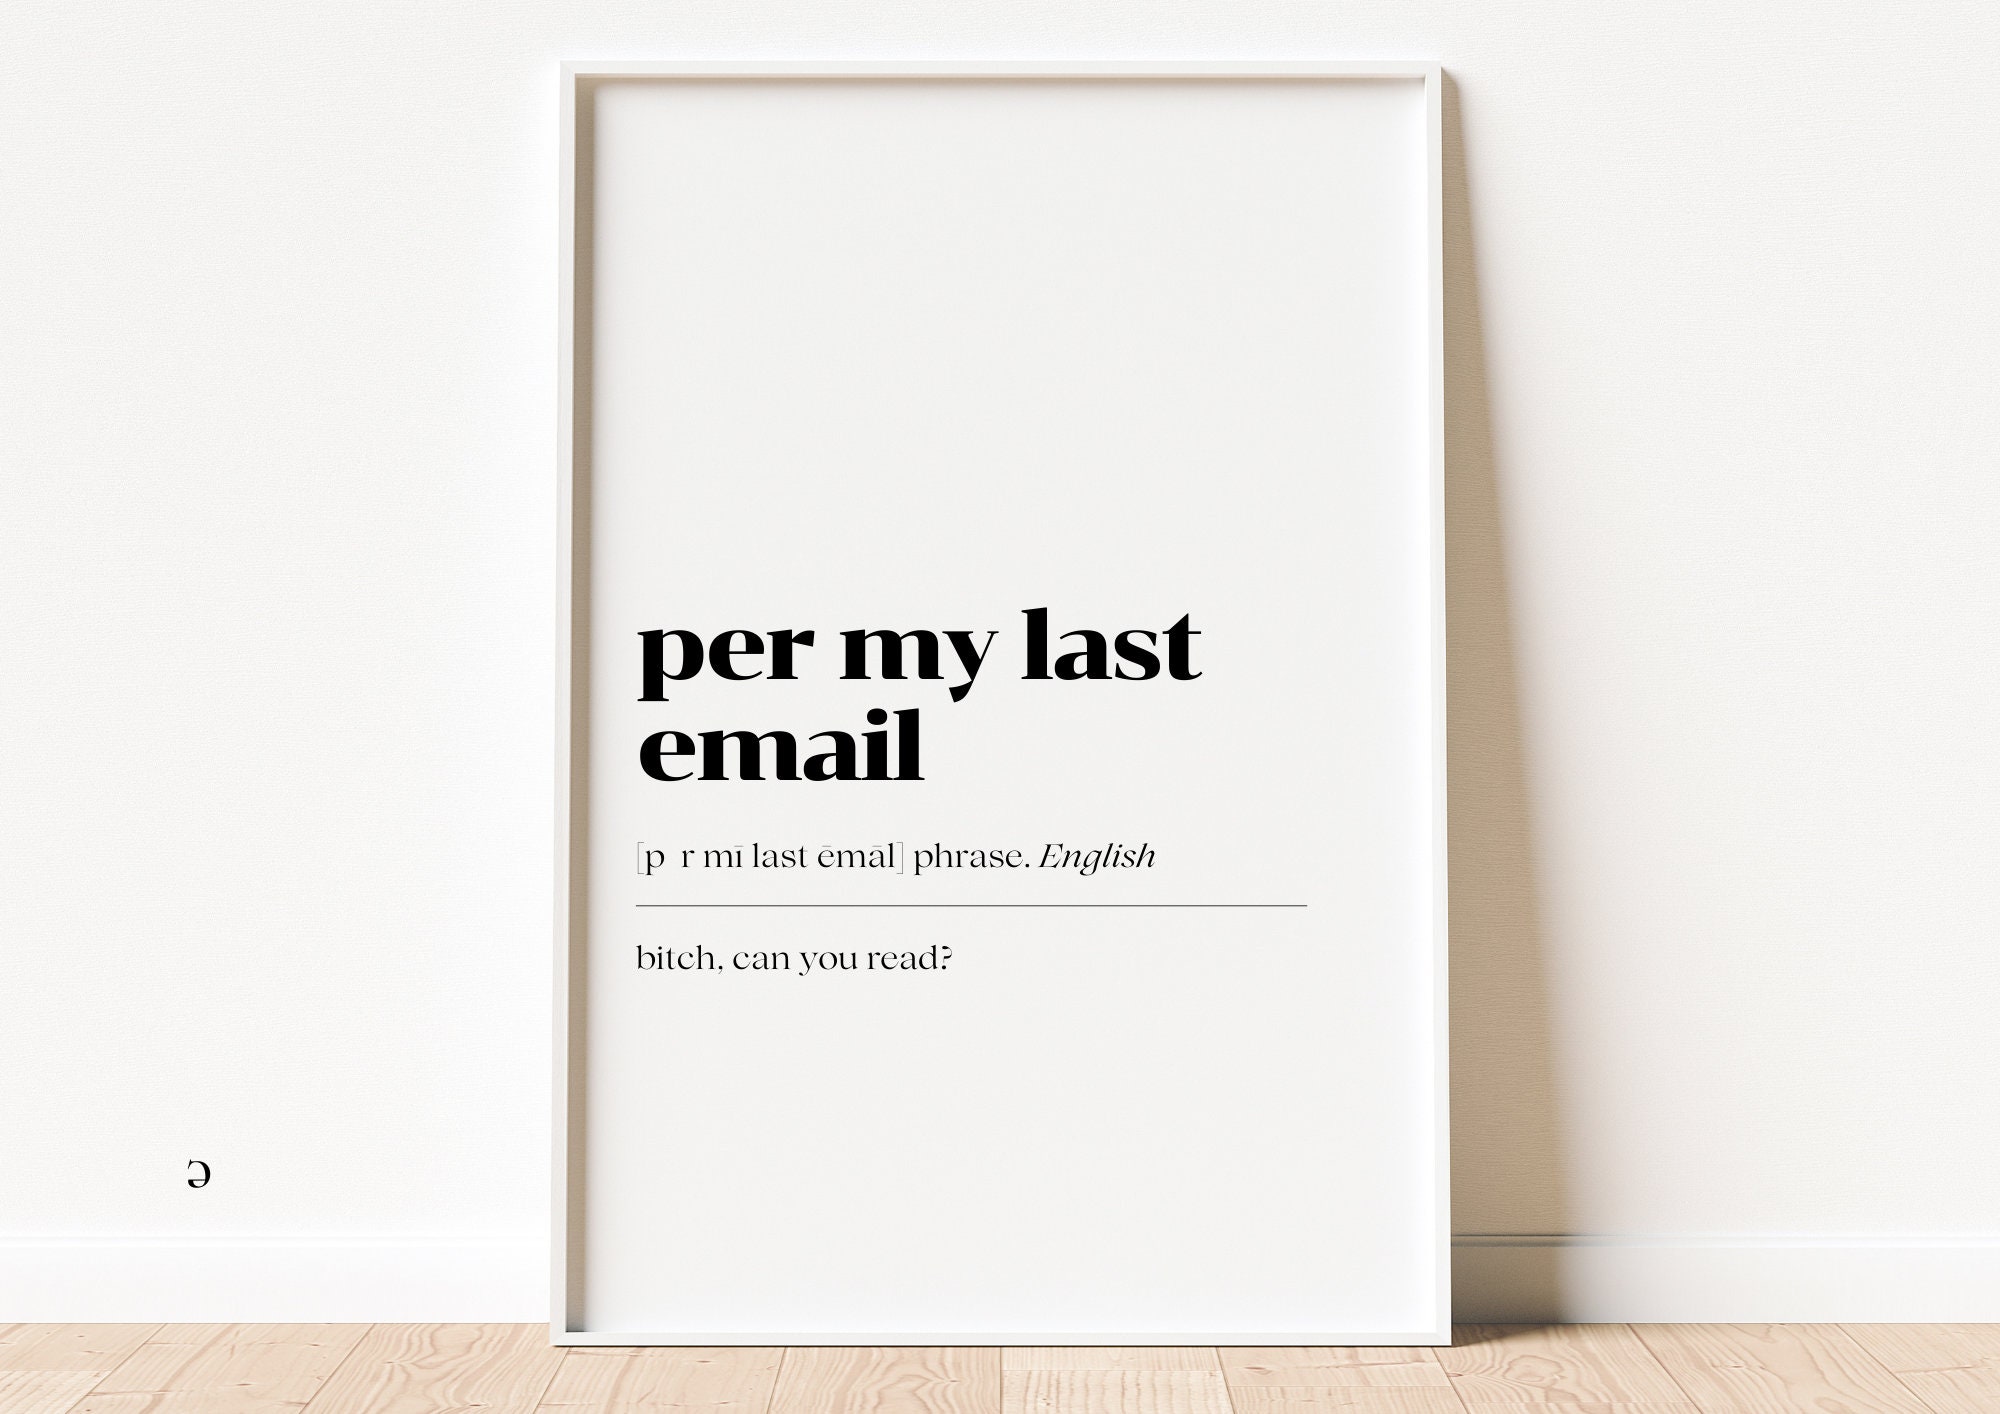 As Per My Last Email  Pen – Pretty by Her